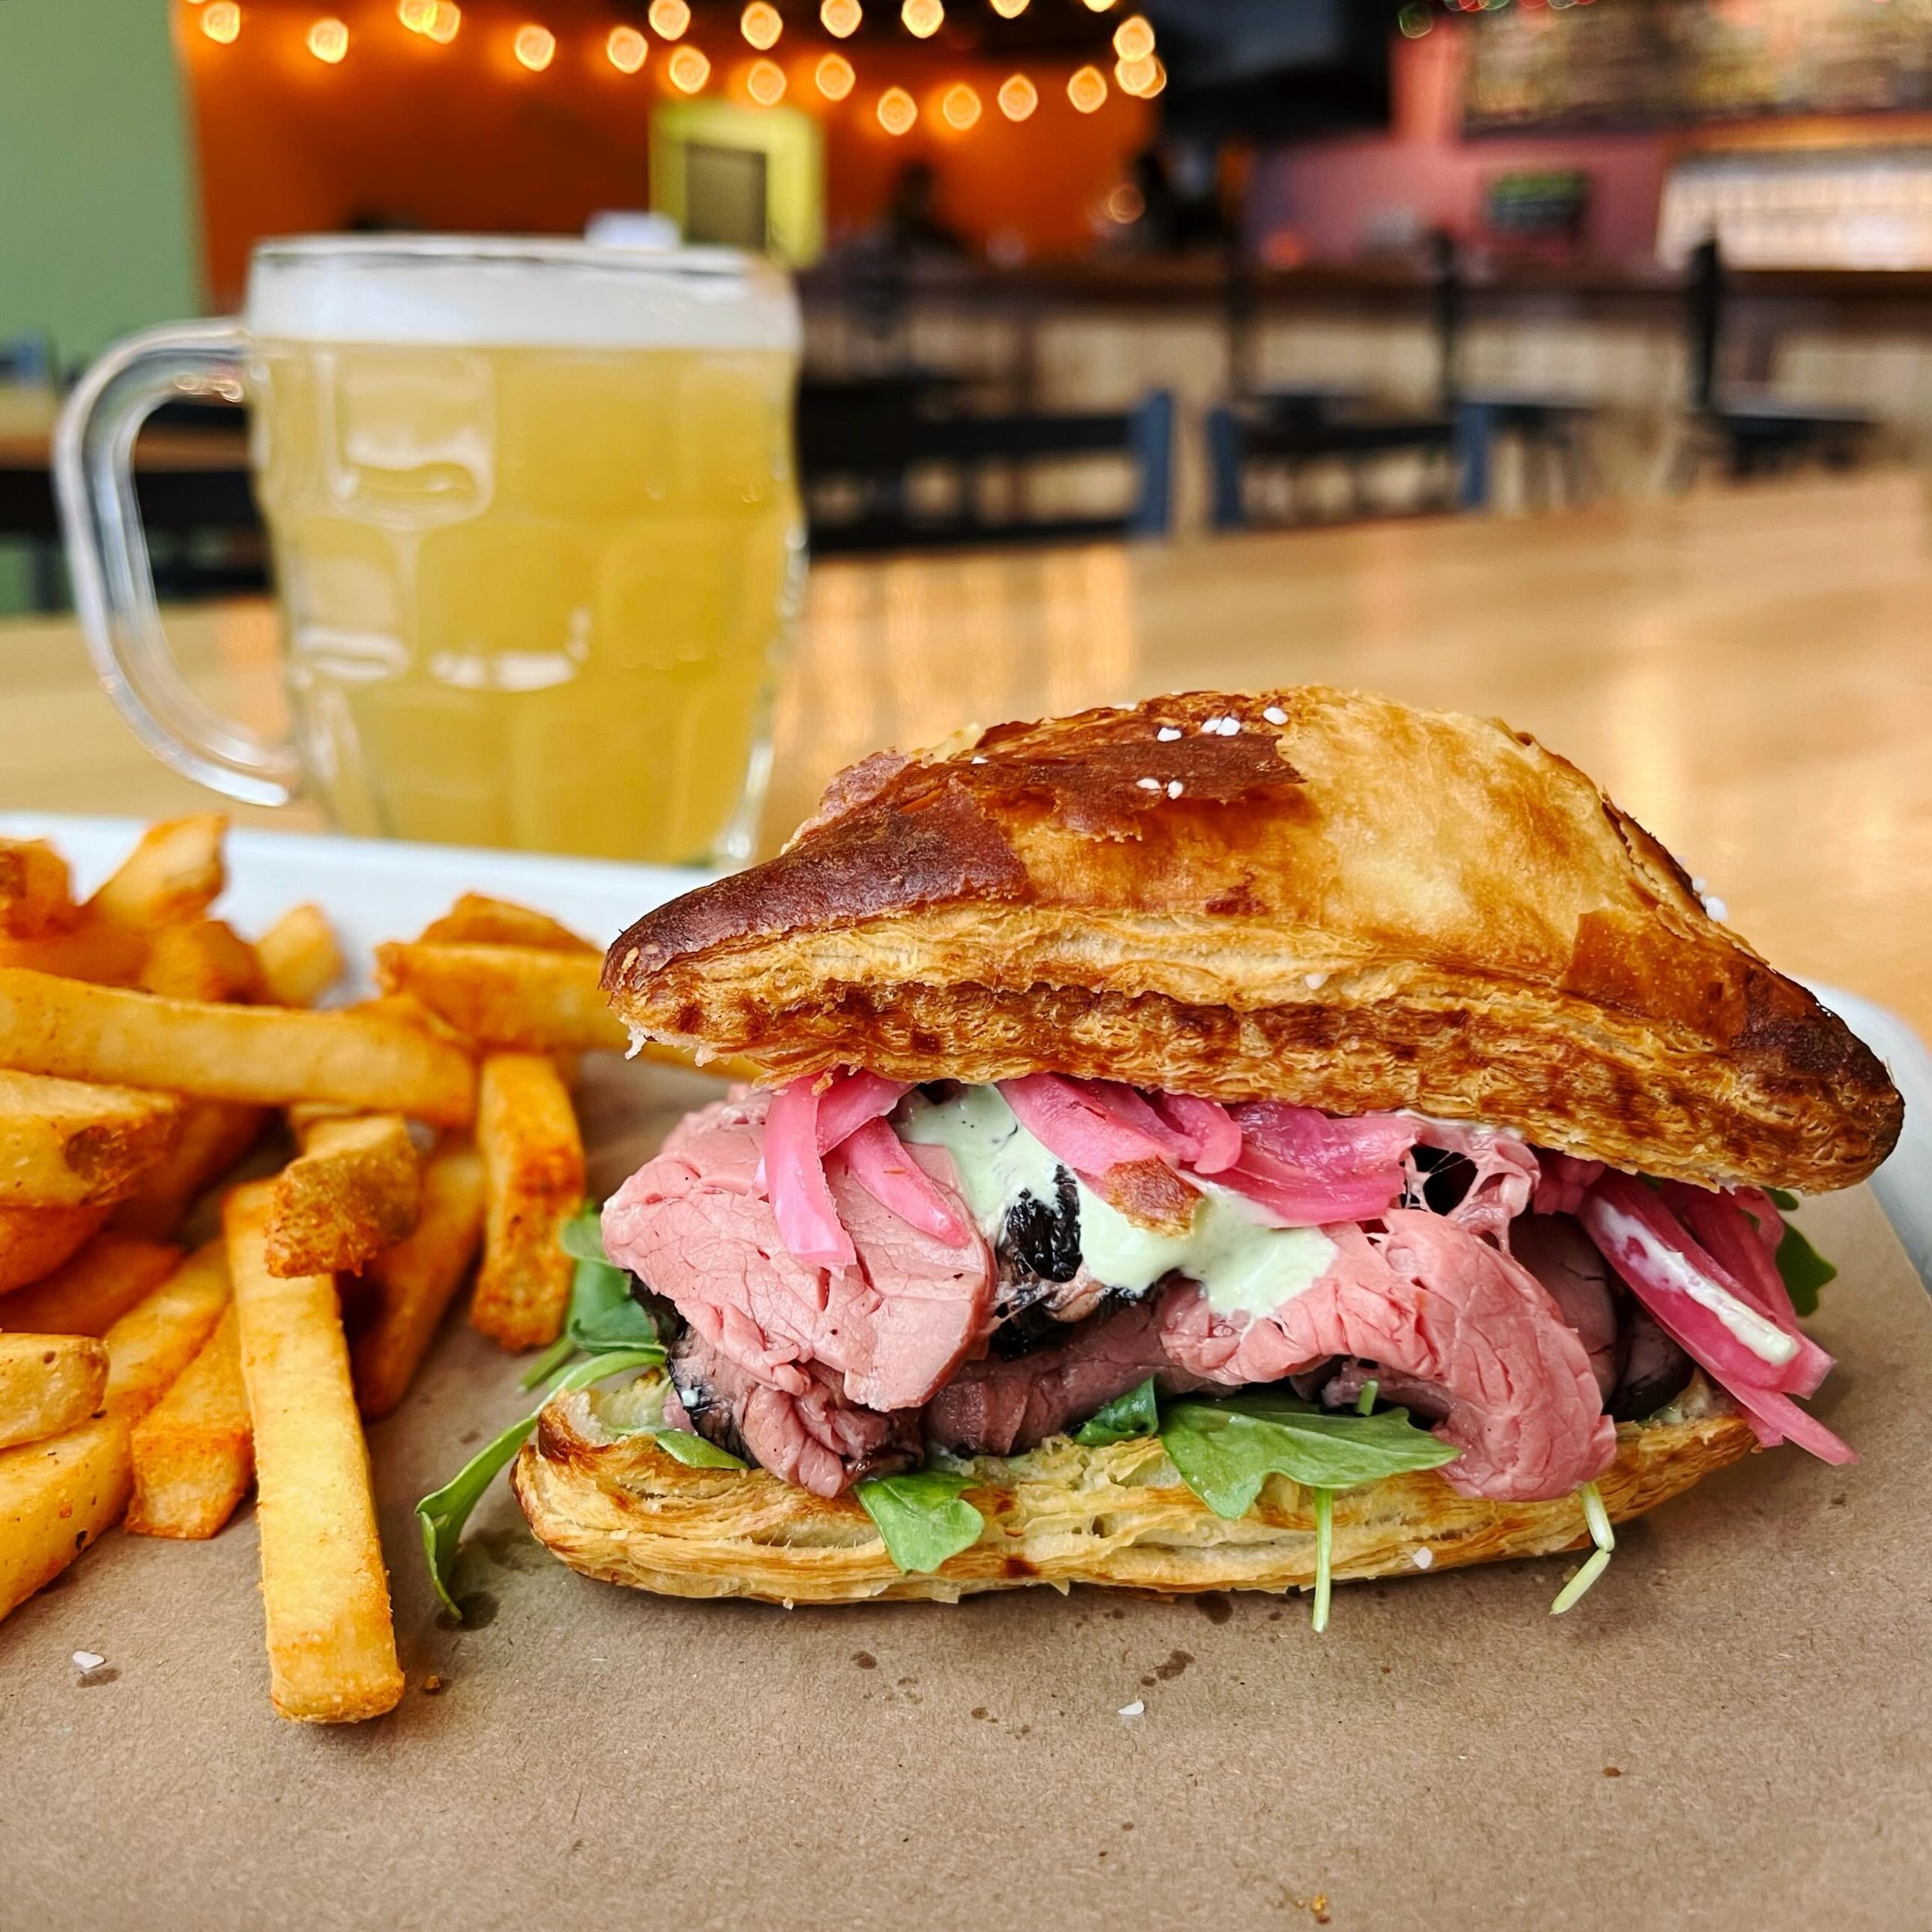 Best Roast Beef in Nashua, dare we say, Southern NH?! 

WTF: Italian Roast Beef
Medium Rare cooked Roast beef, Boursin cheese, pickled onion, arugula, basil horseradish sauce on a pretzel croissant with fries $16

Come give it a try and see!

🍺 Chef